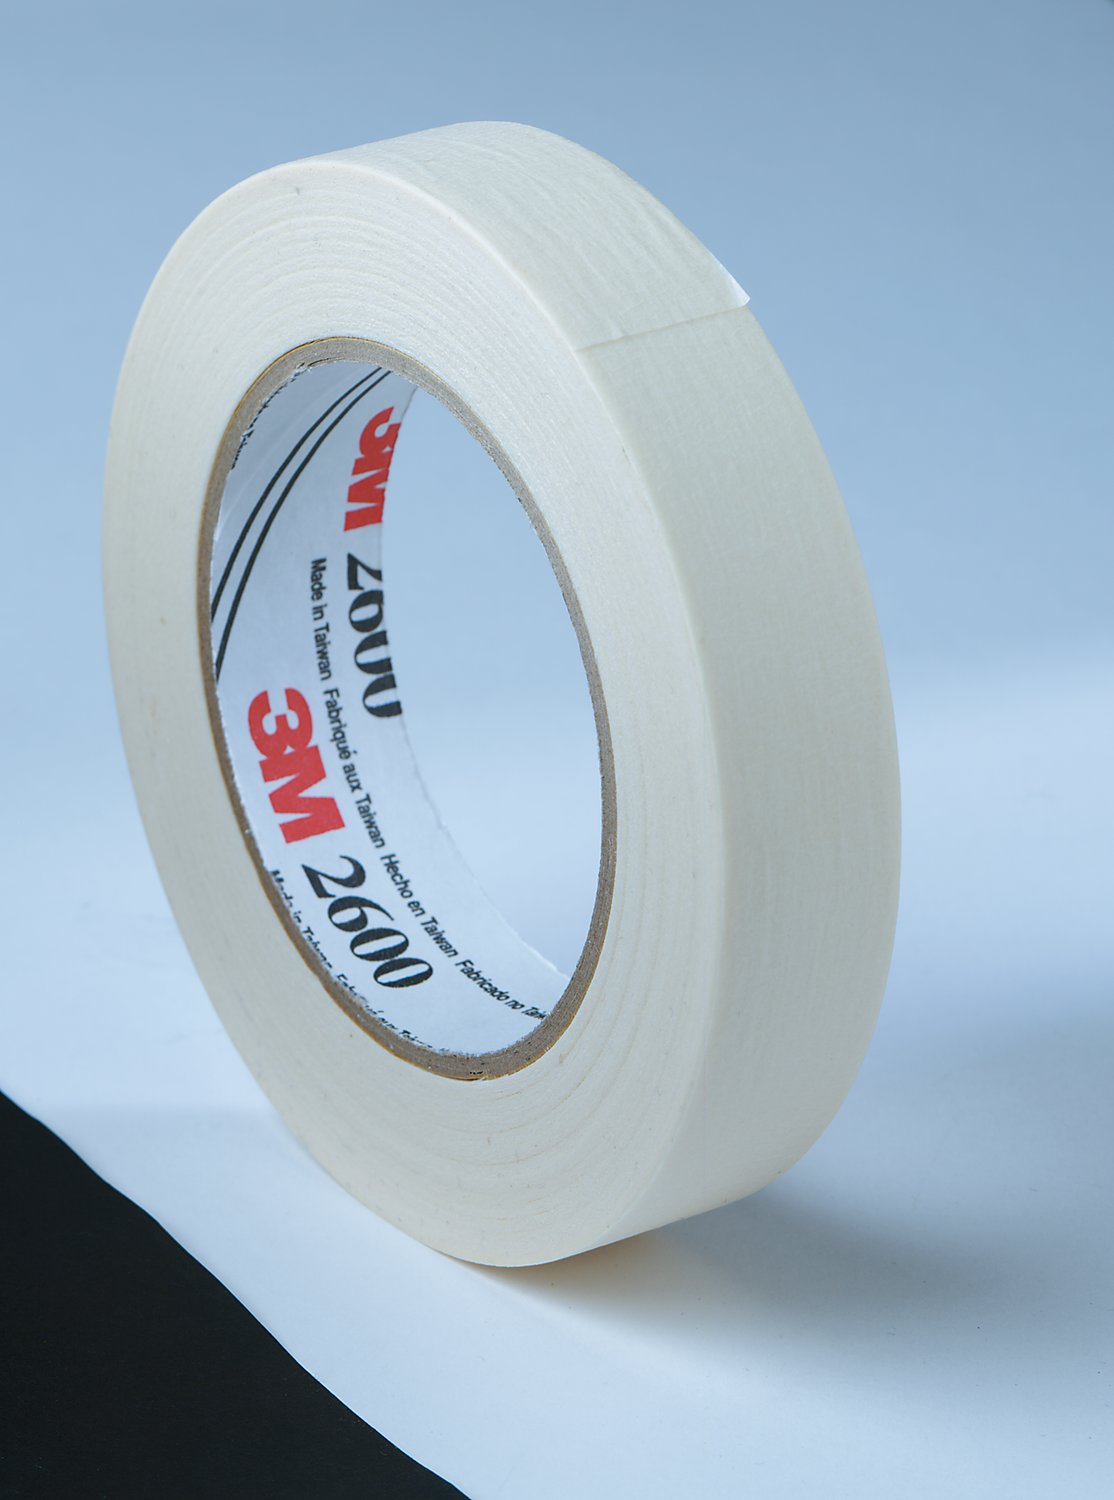 3in x 50m Permacell Upholstery Tape Black - Gaffer Tape